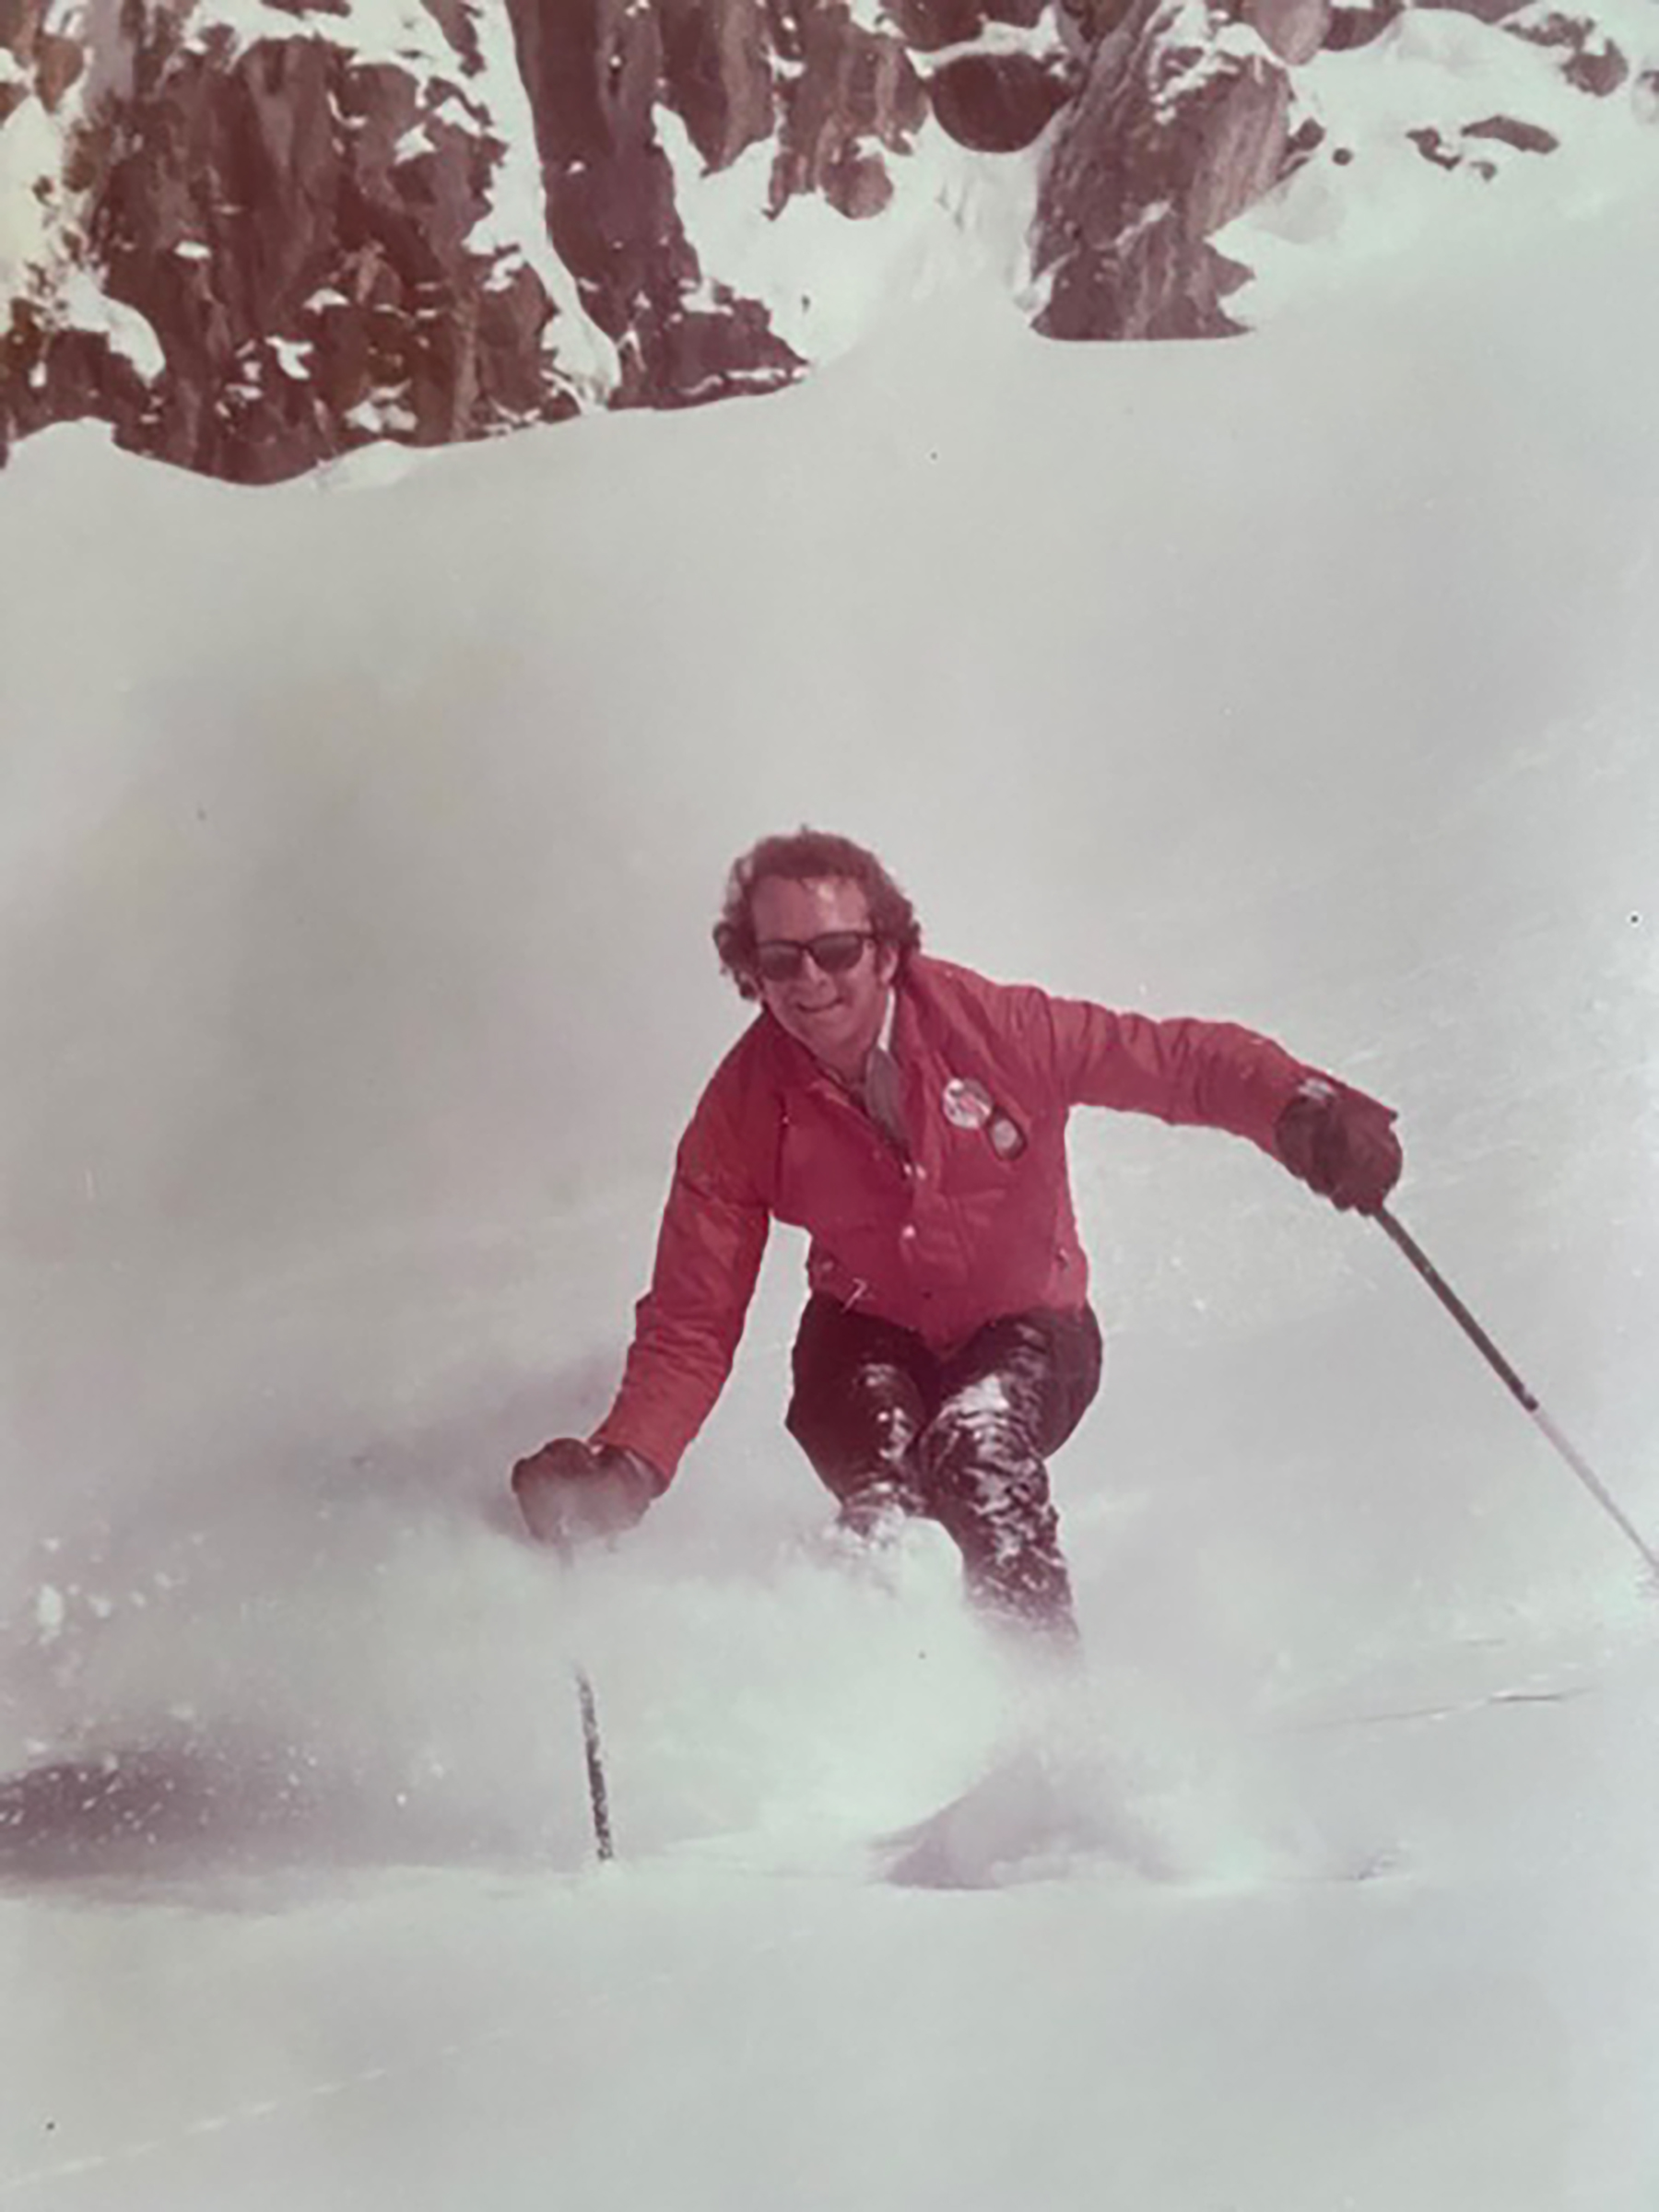 Gow skiing in the 70s (Courtesy John Gow)